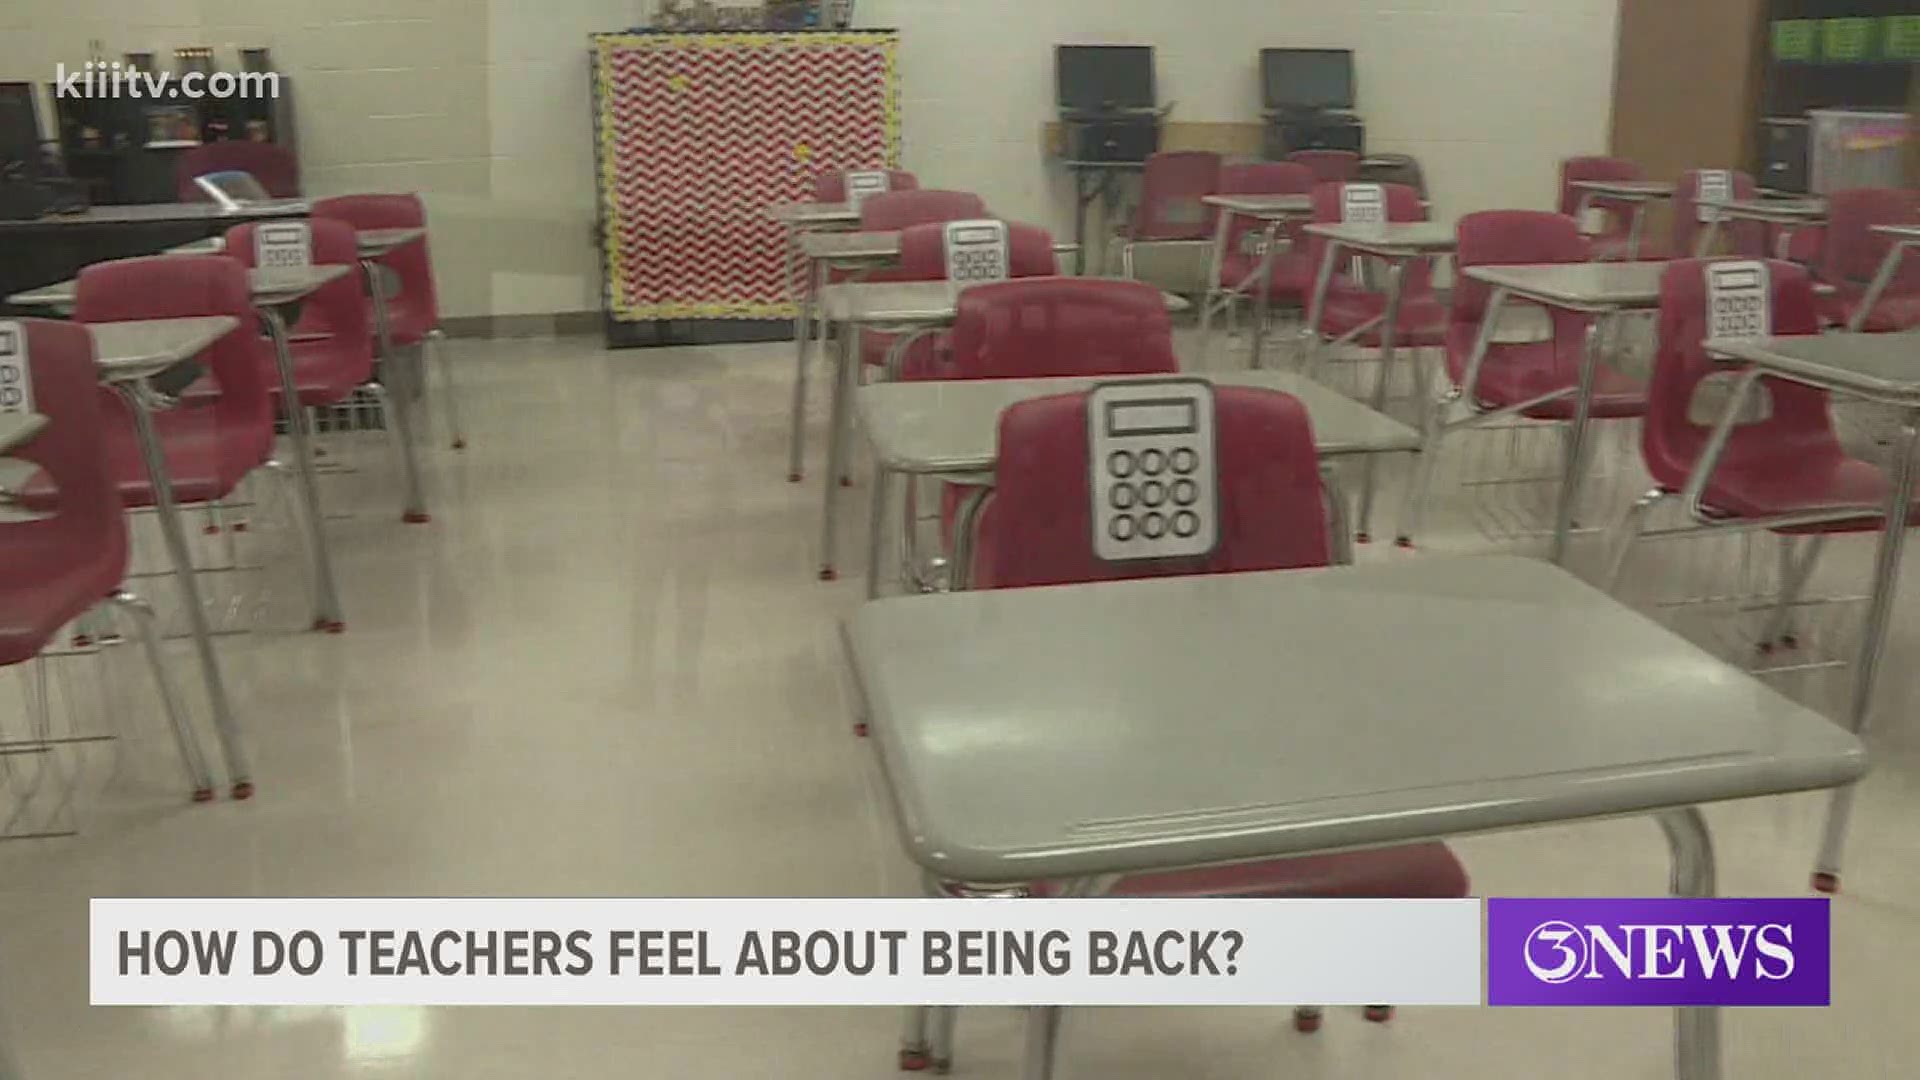 The local organization says they’re getting mixed reviews from educators.